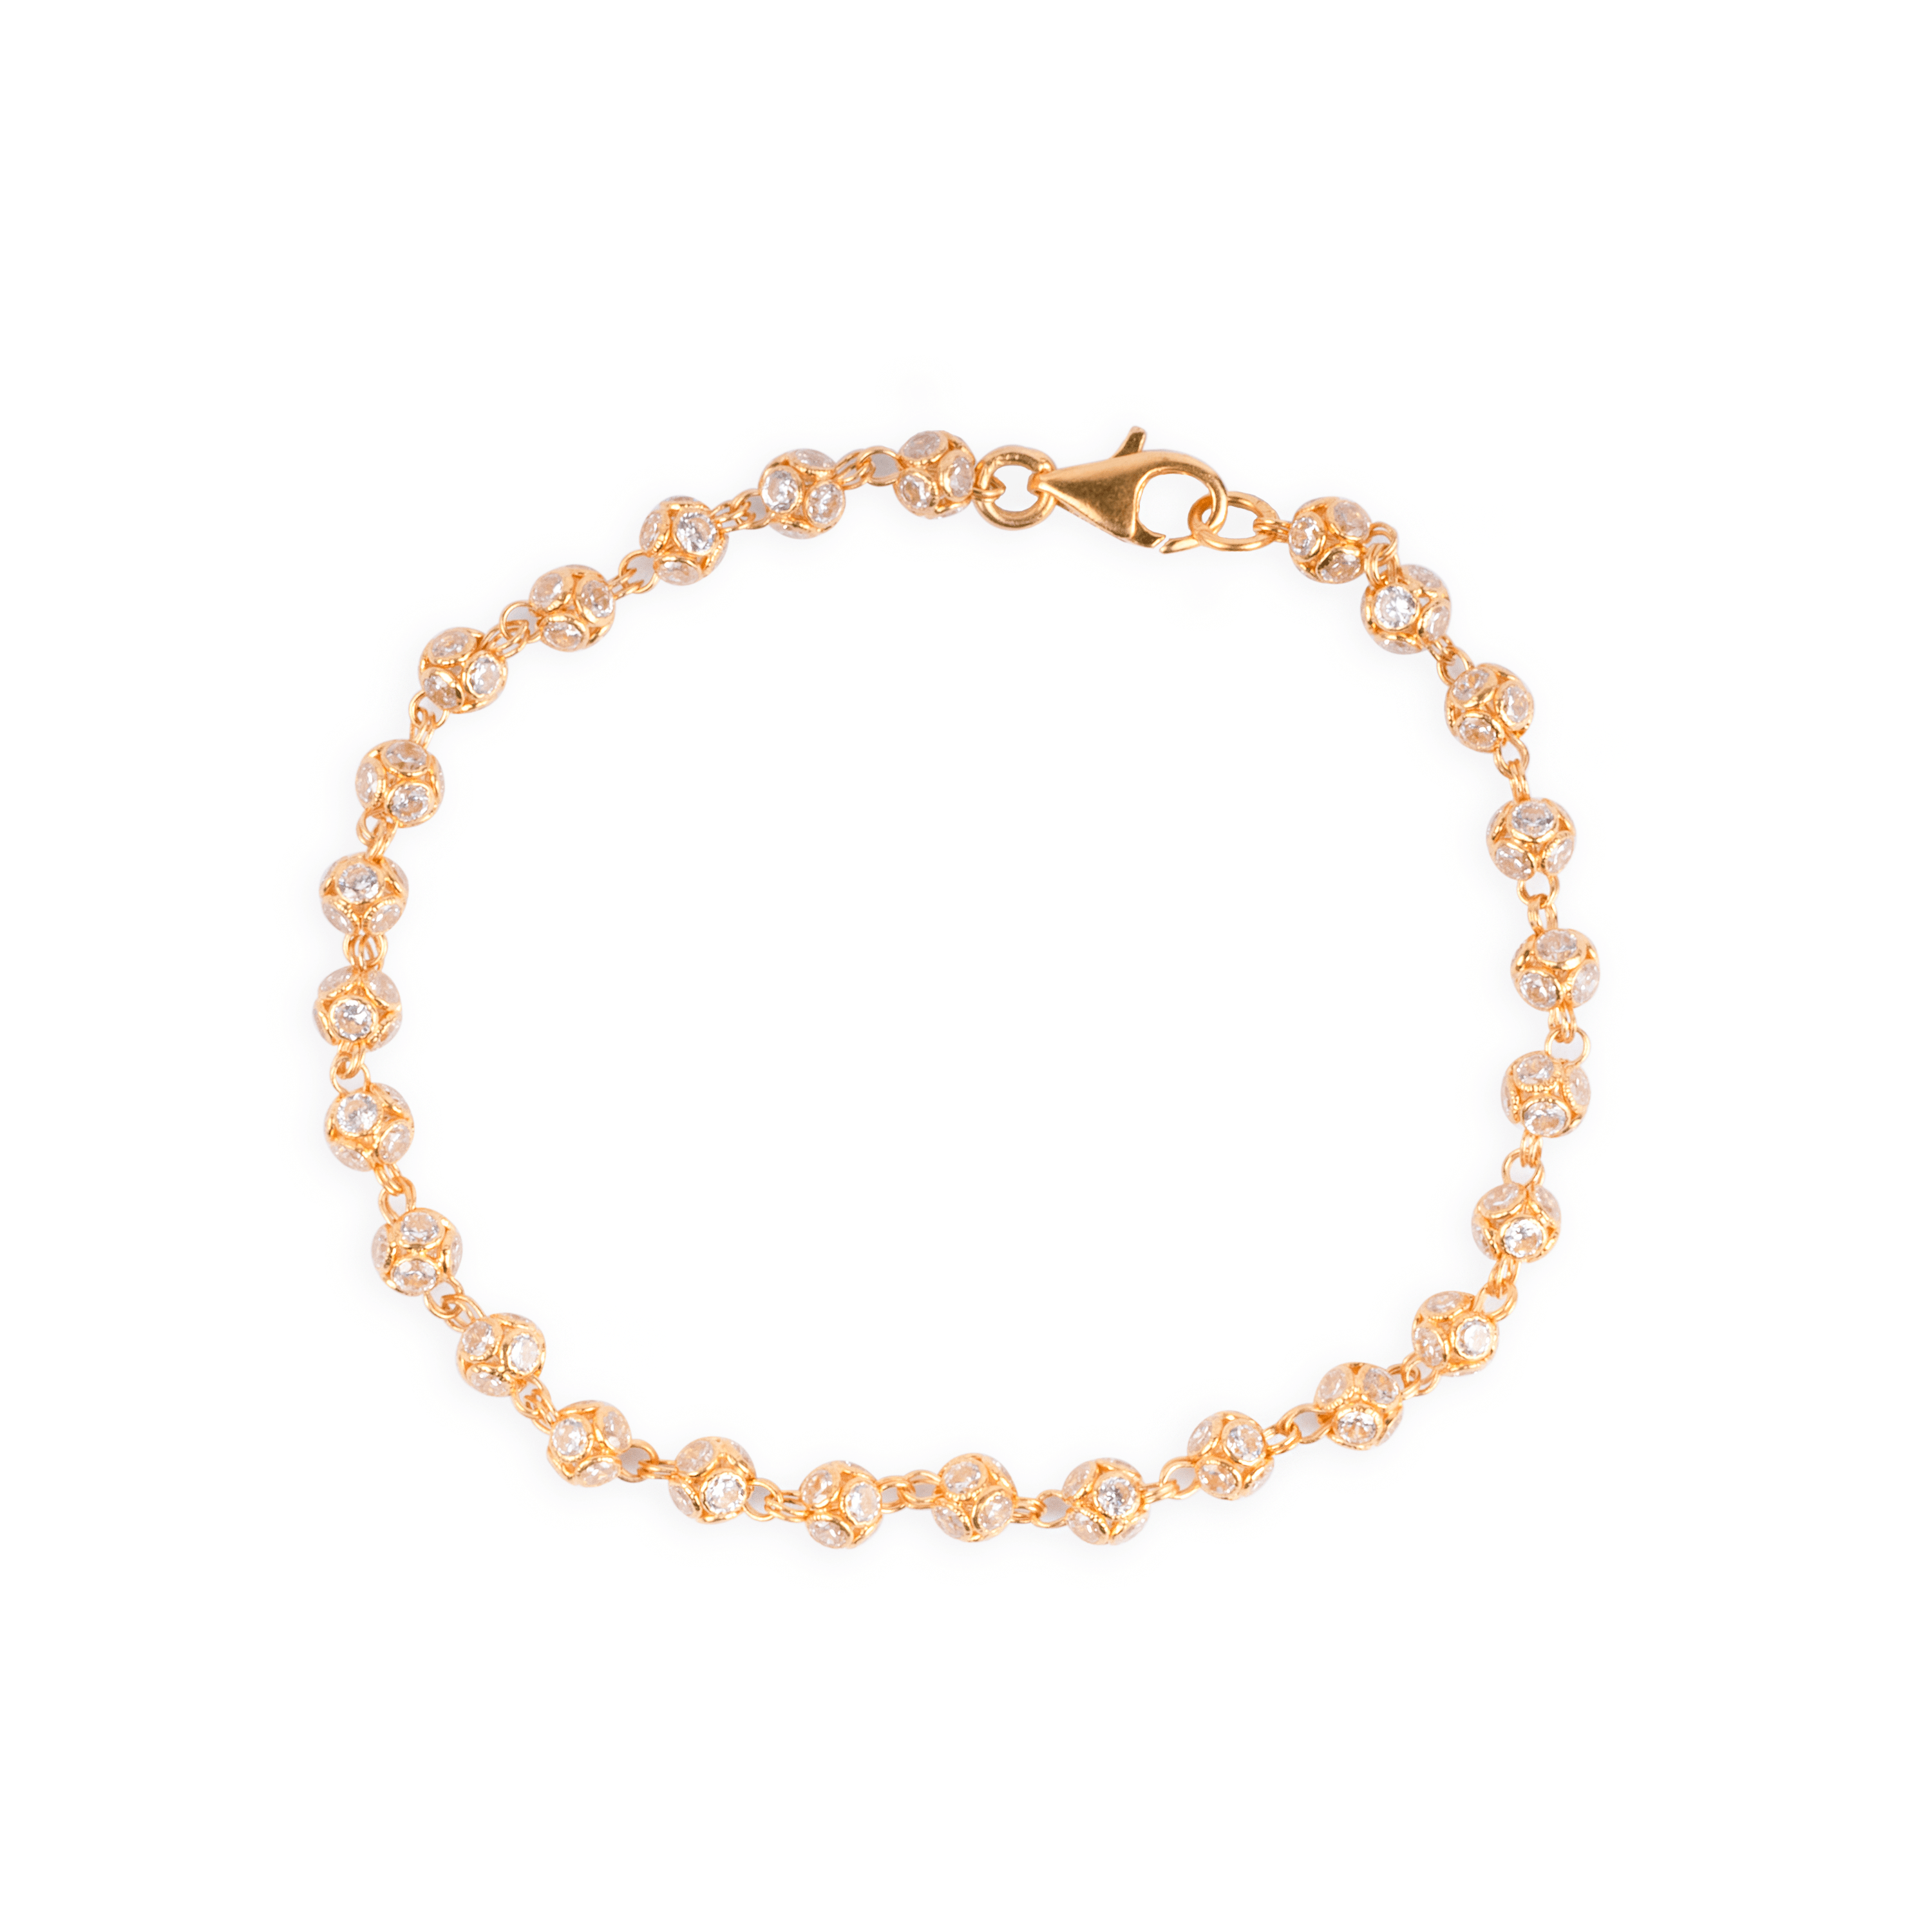 22ct Gold Beaded Bracelet with Cubic Zirconia Stones with Lobster Clasp (6.5g) LBR-7133 - Minar Jewellers